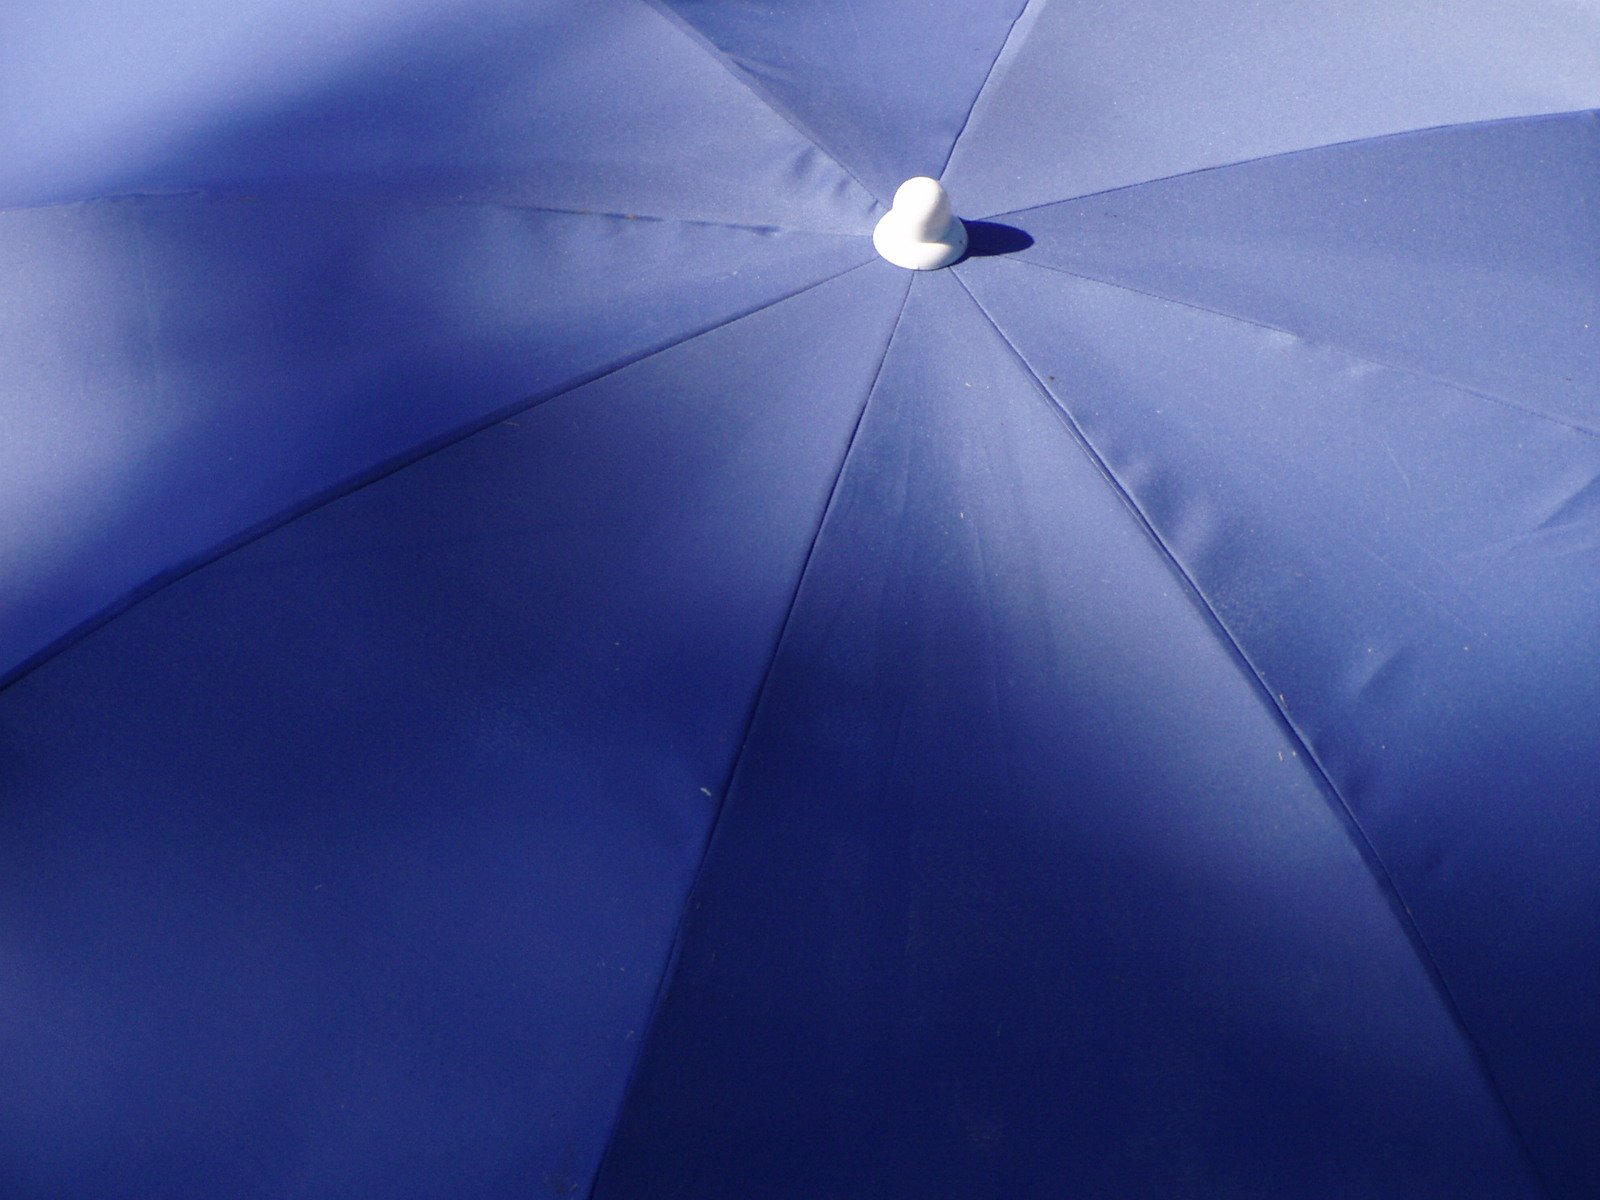 an umbrella and its light is shown with a white dot on the top